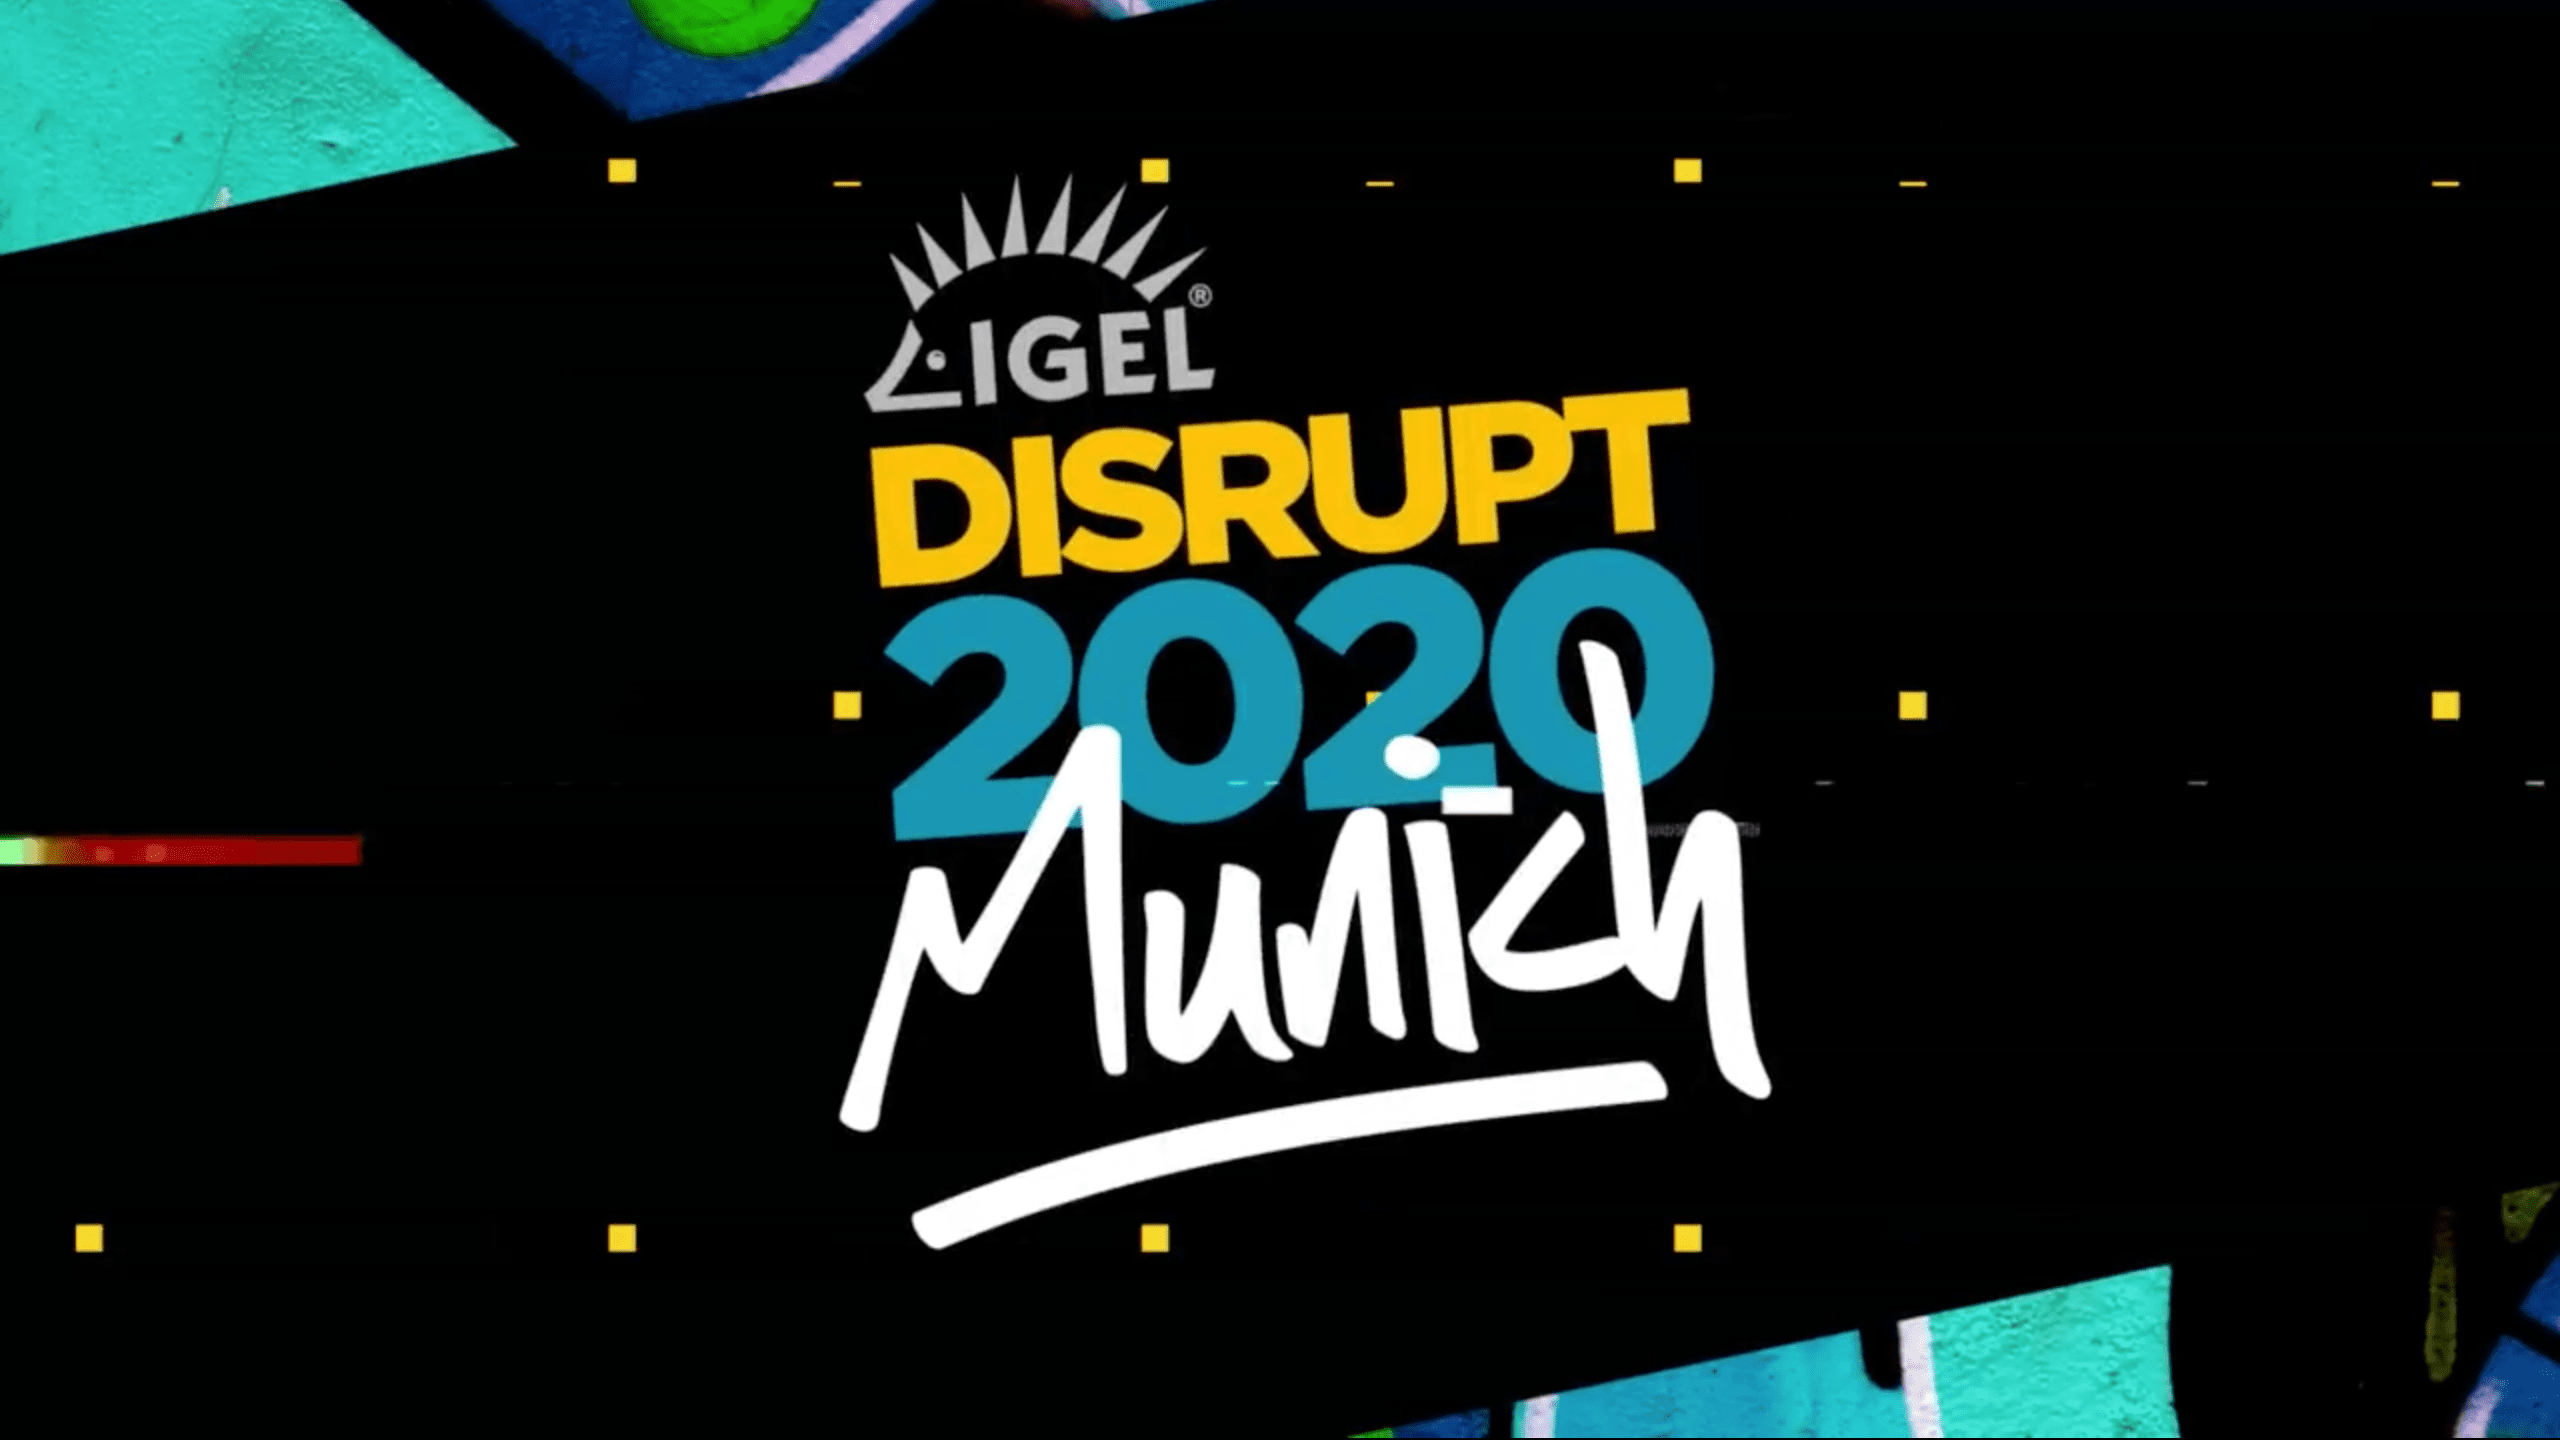 IGEL Disrupt 2020 Munich promo featuring Jed Ayres